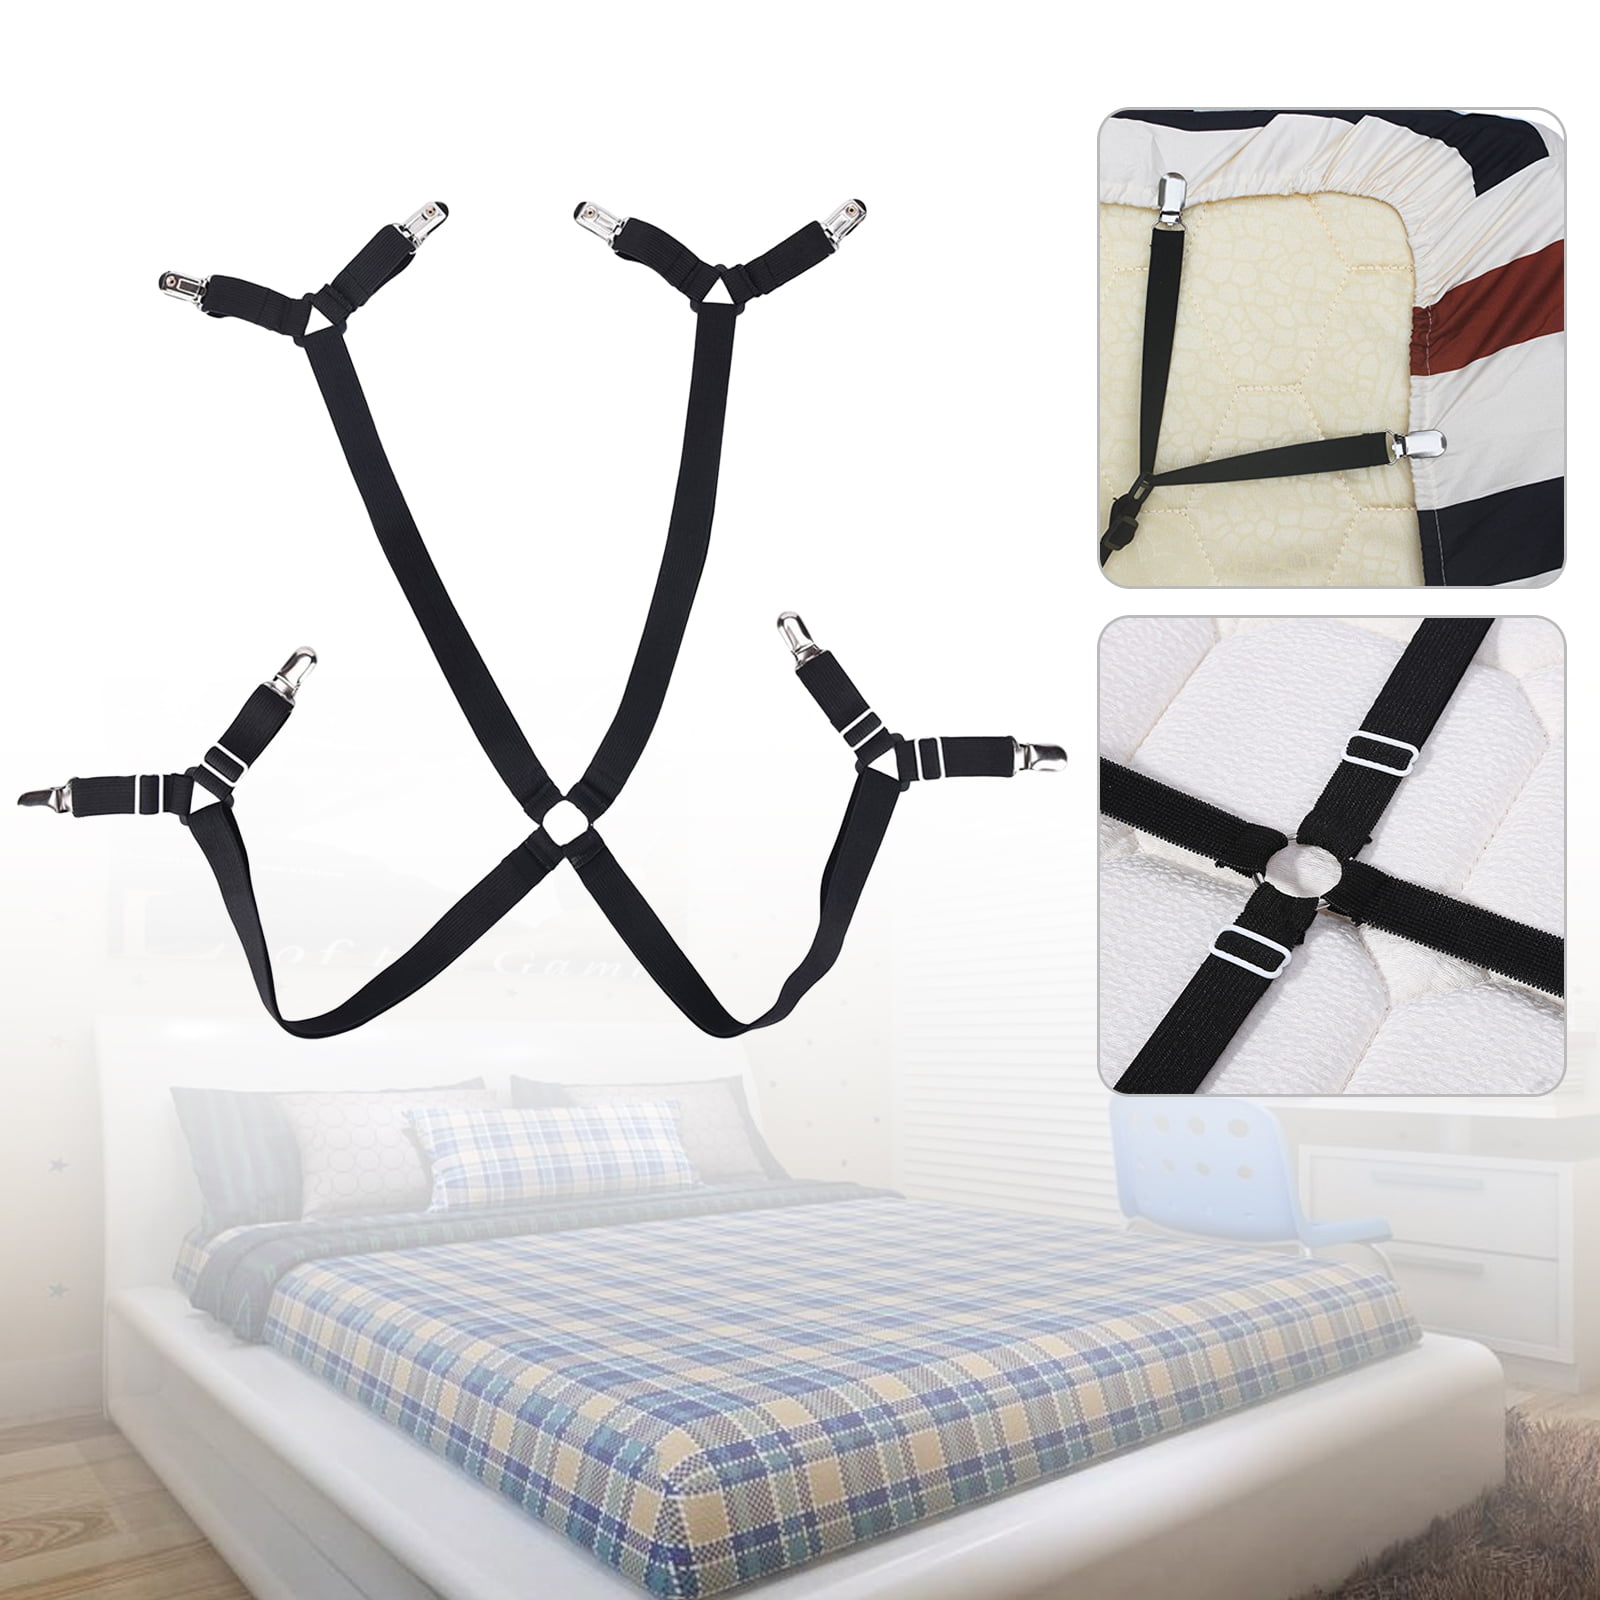 Crisscross Adjustable Bed Fitted Sheet Straps Suspenders Gripper Fastener IN USA 